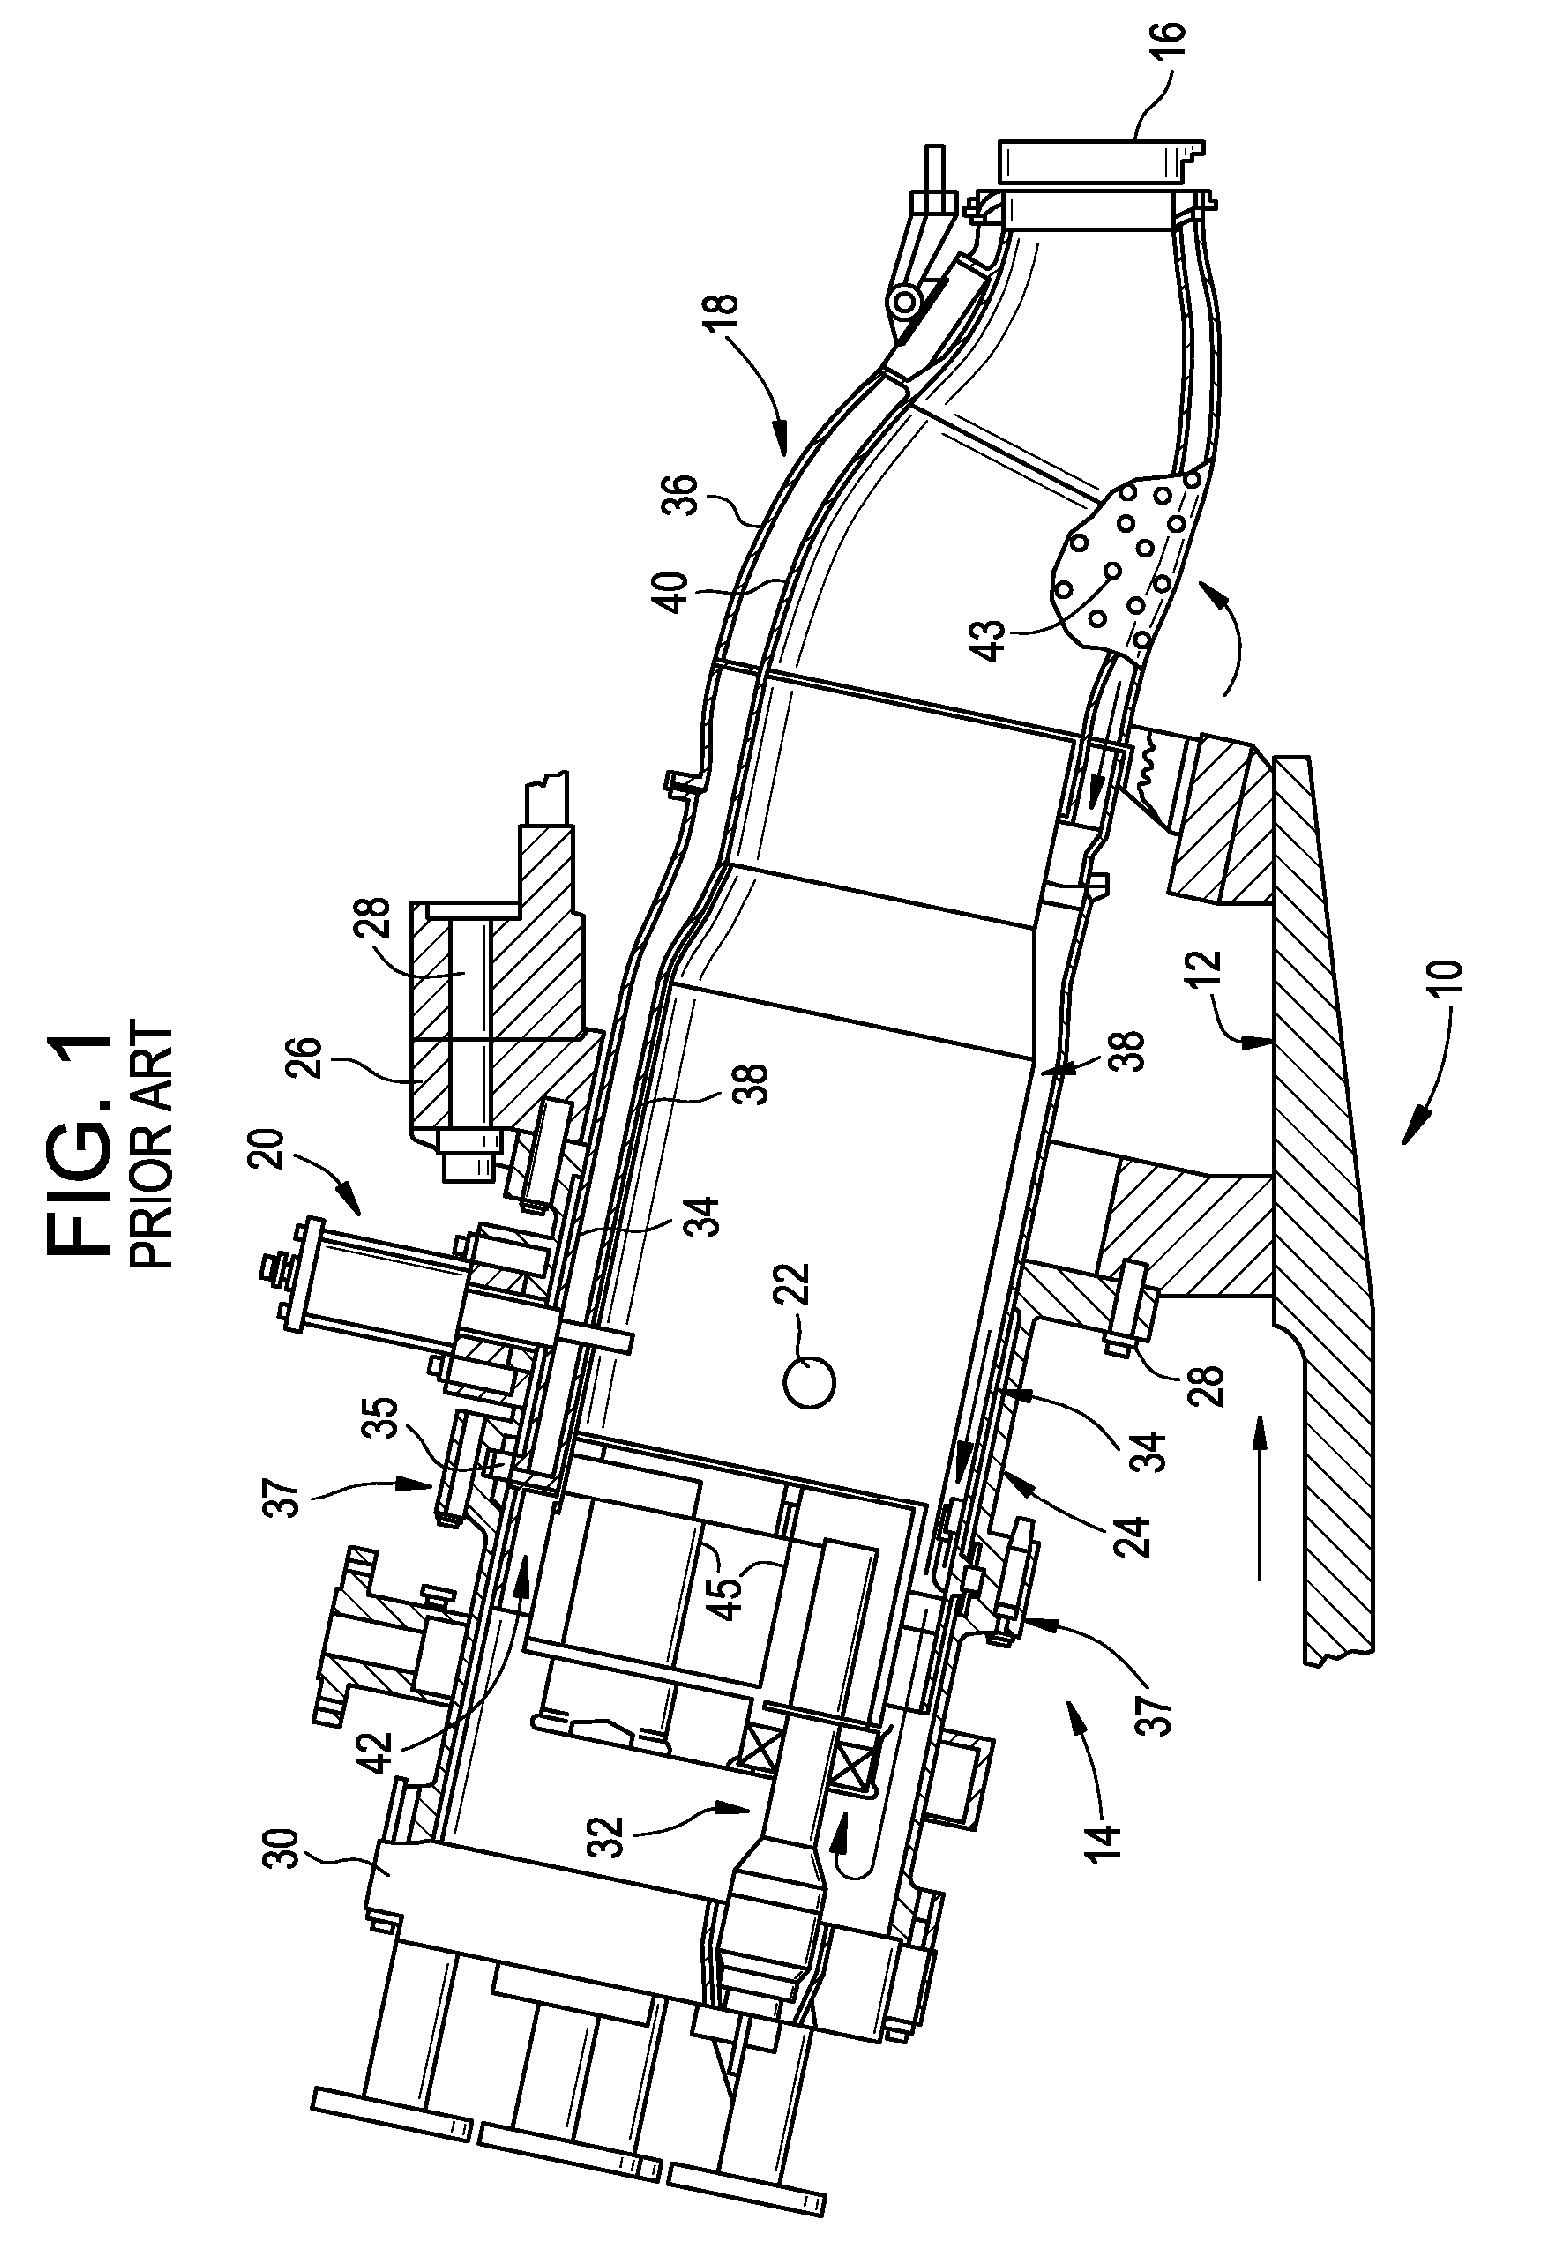 Method and apparatus for cooling gas turbine fuel nozzles